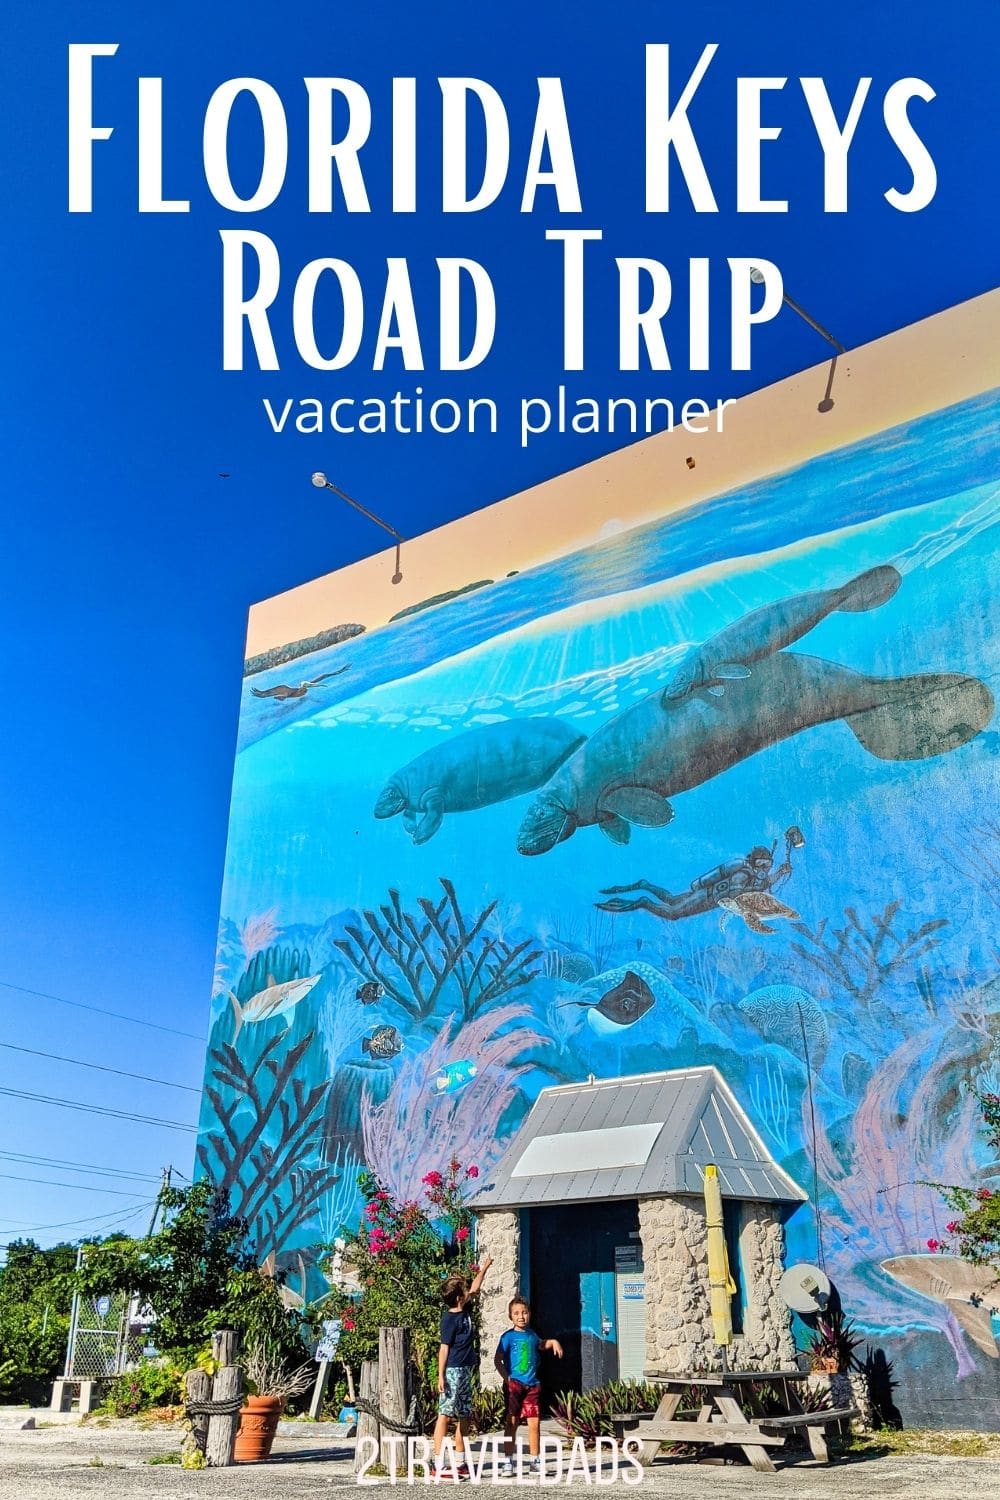 Complete guide to plan a Florida Keys vacation, from which islands to stay one, Florida Keys resorts and vacation rentals for families, and how to get to the Keys whether it's flights to Key West or a road trip.